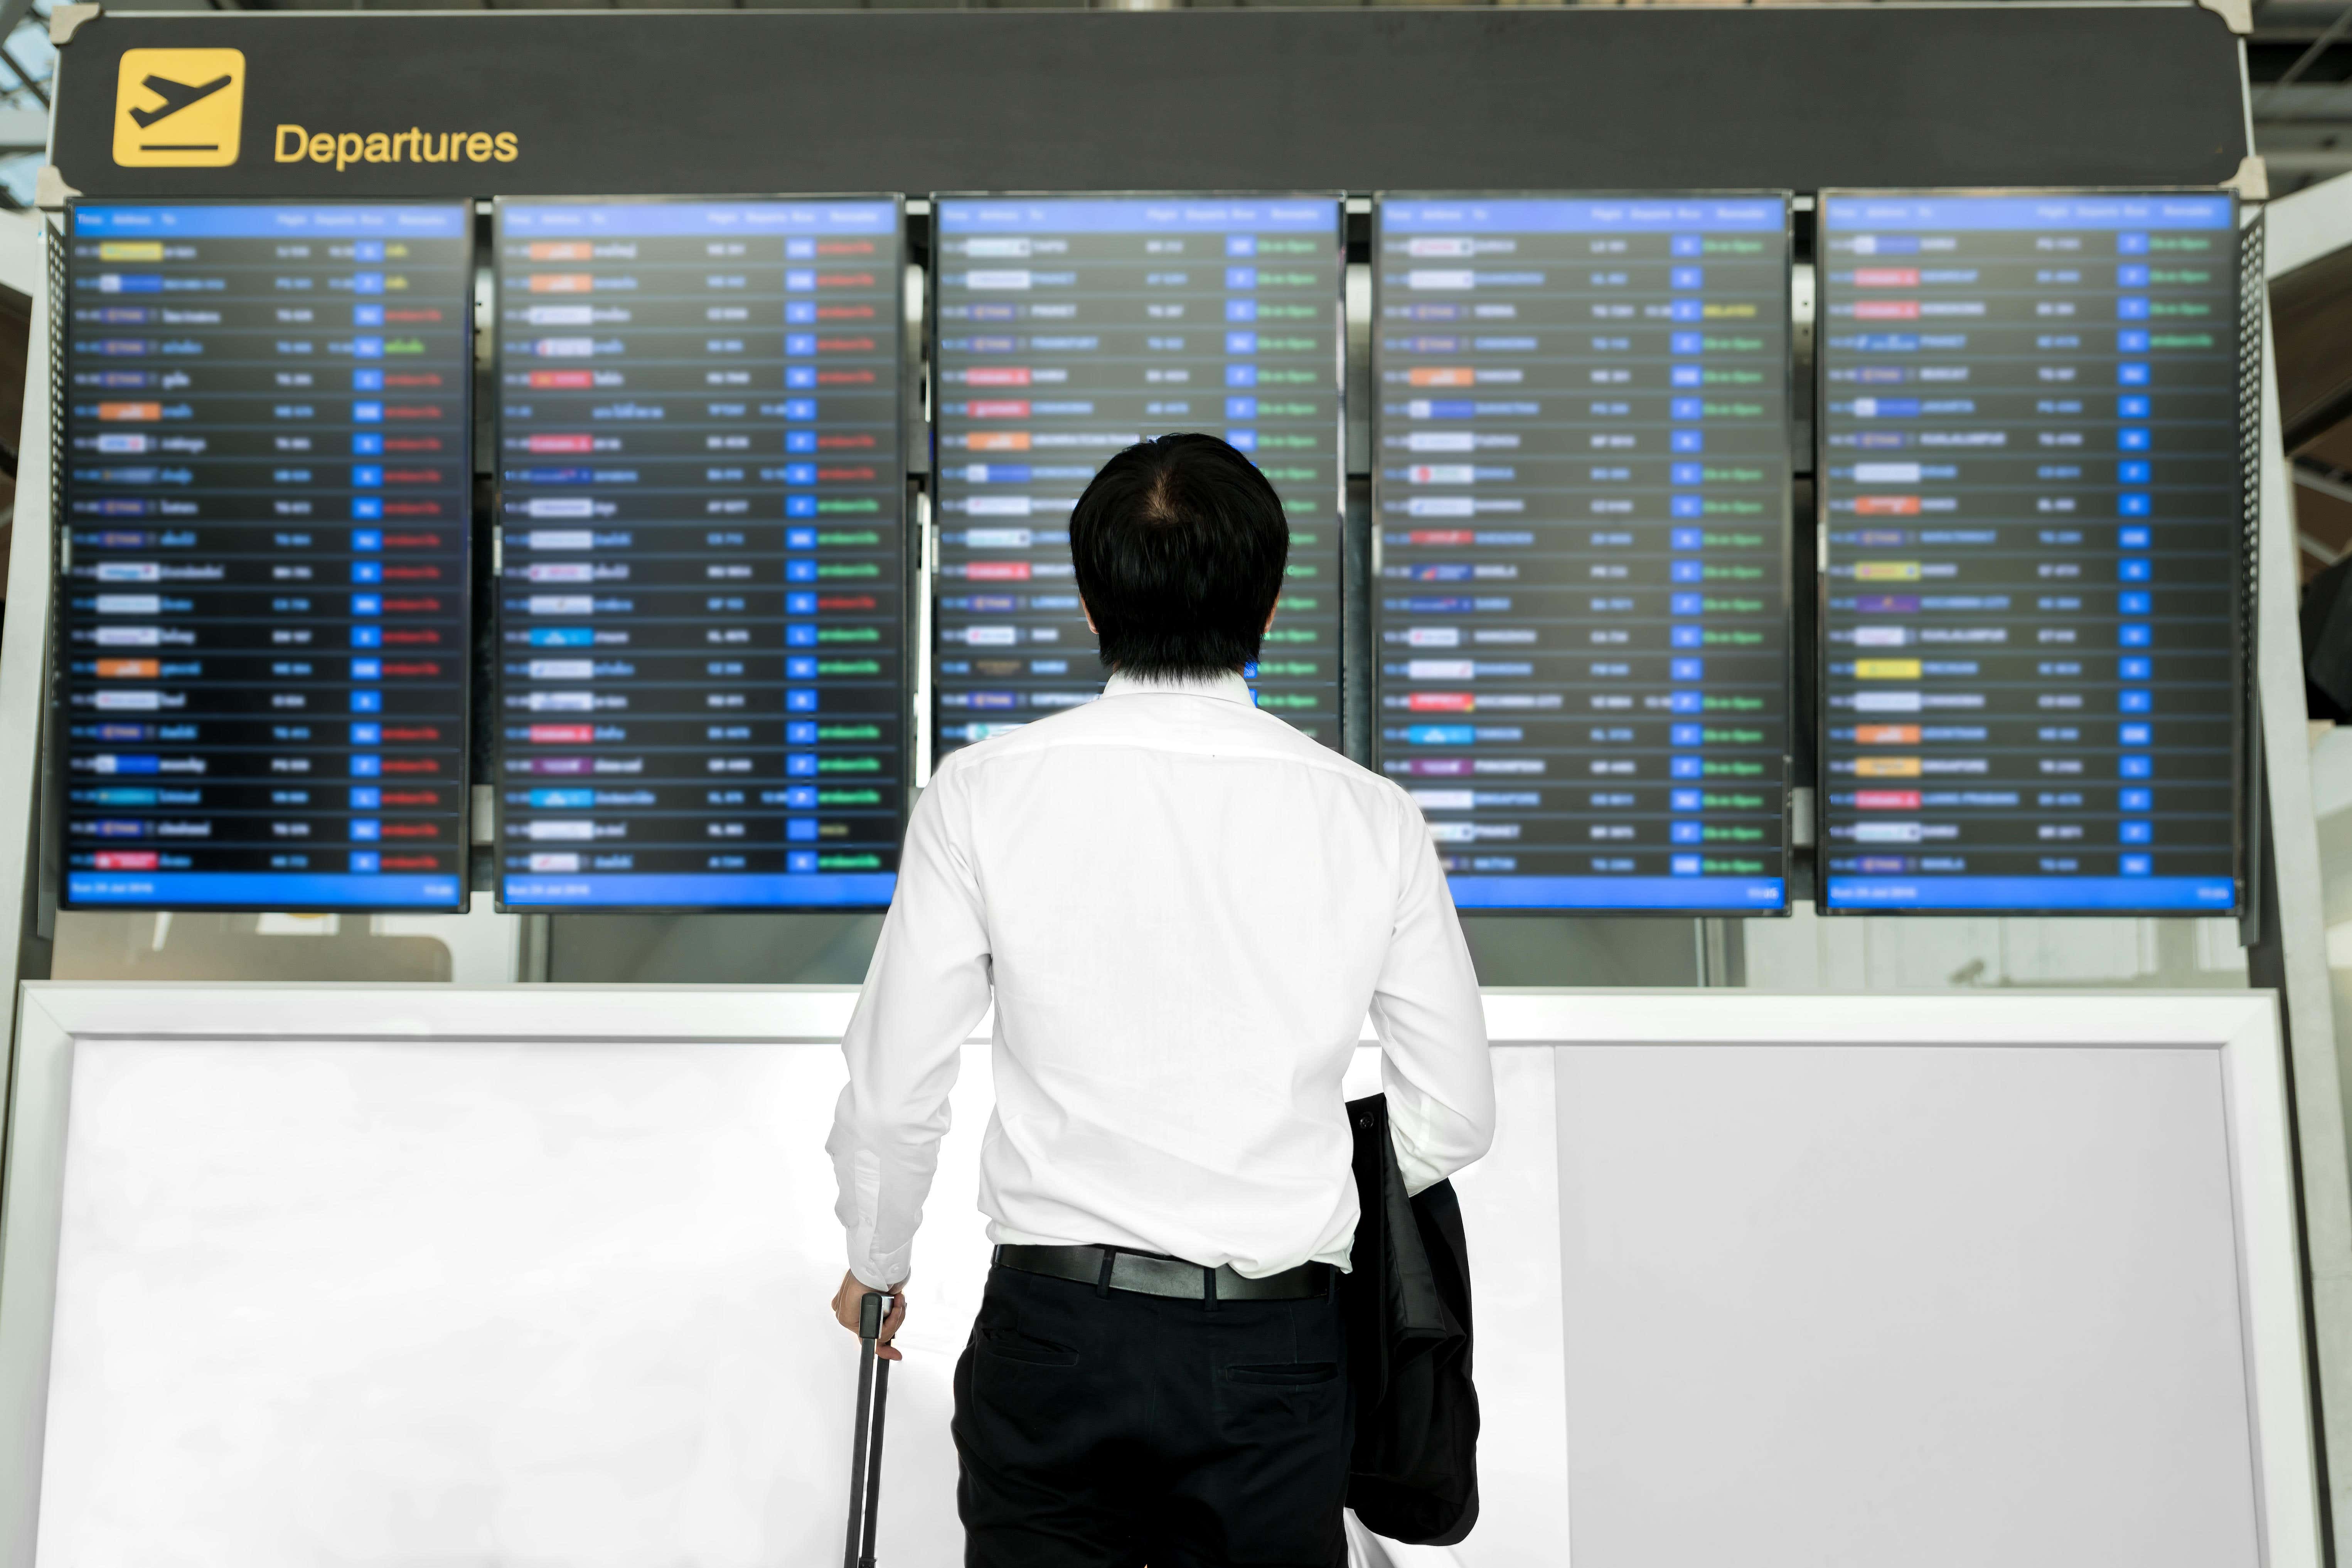 Compensation is currently only offered when flights are delayed for more than three hours